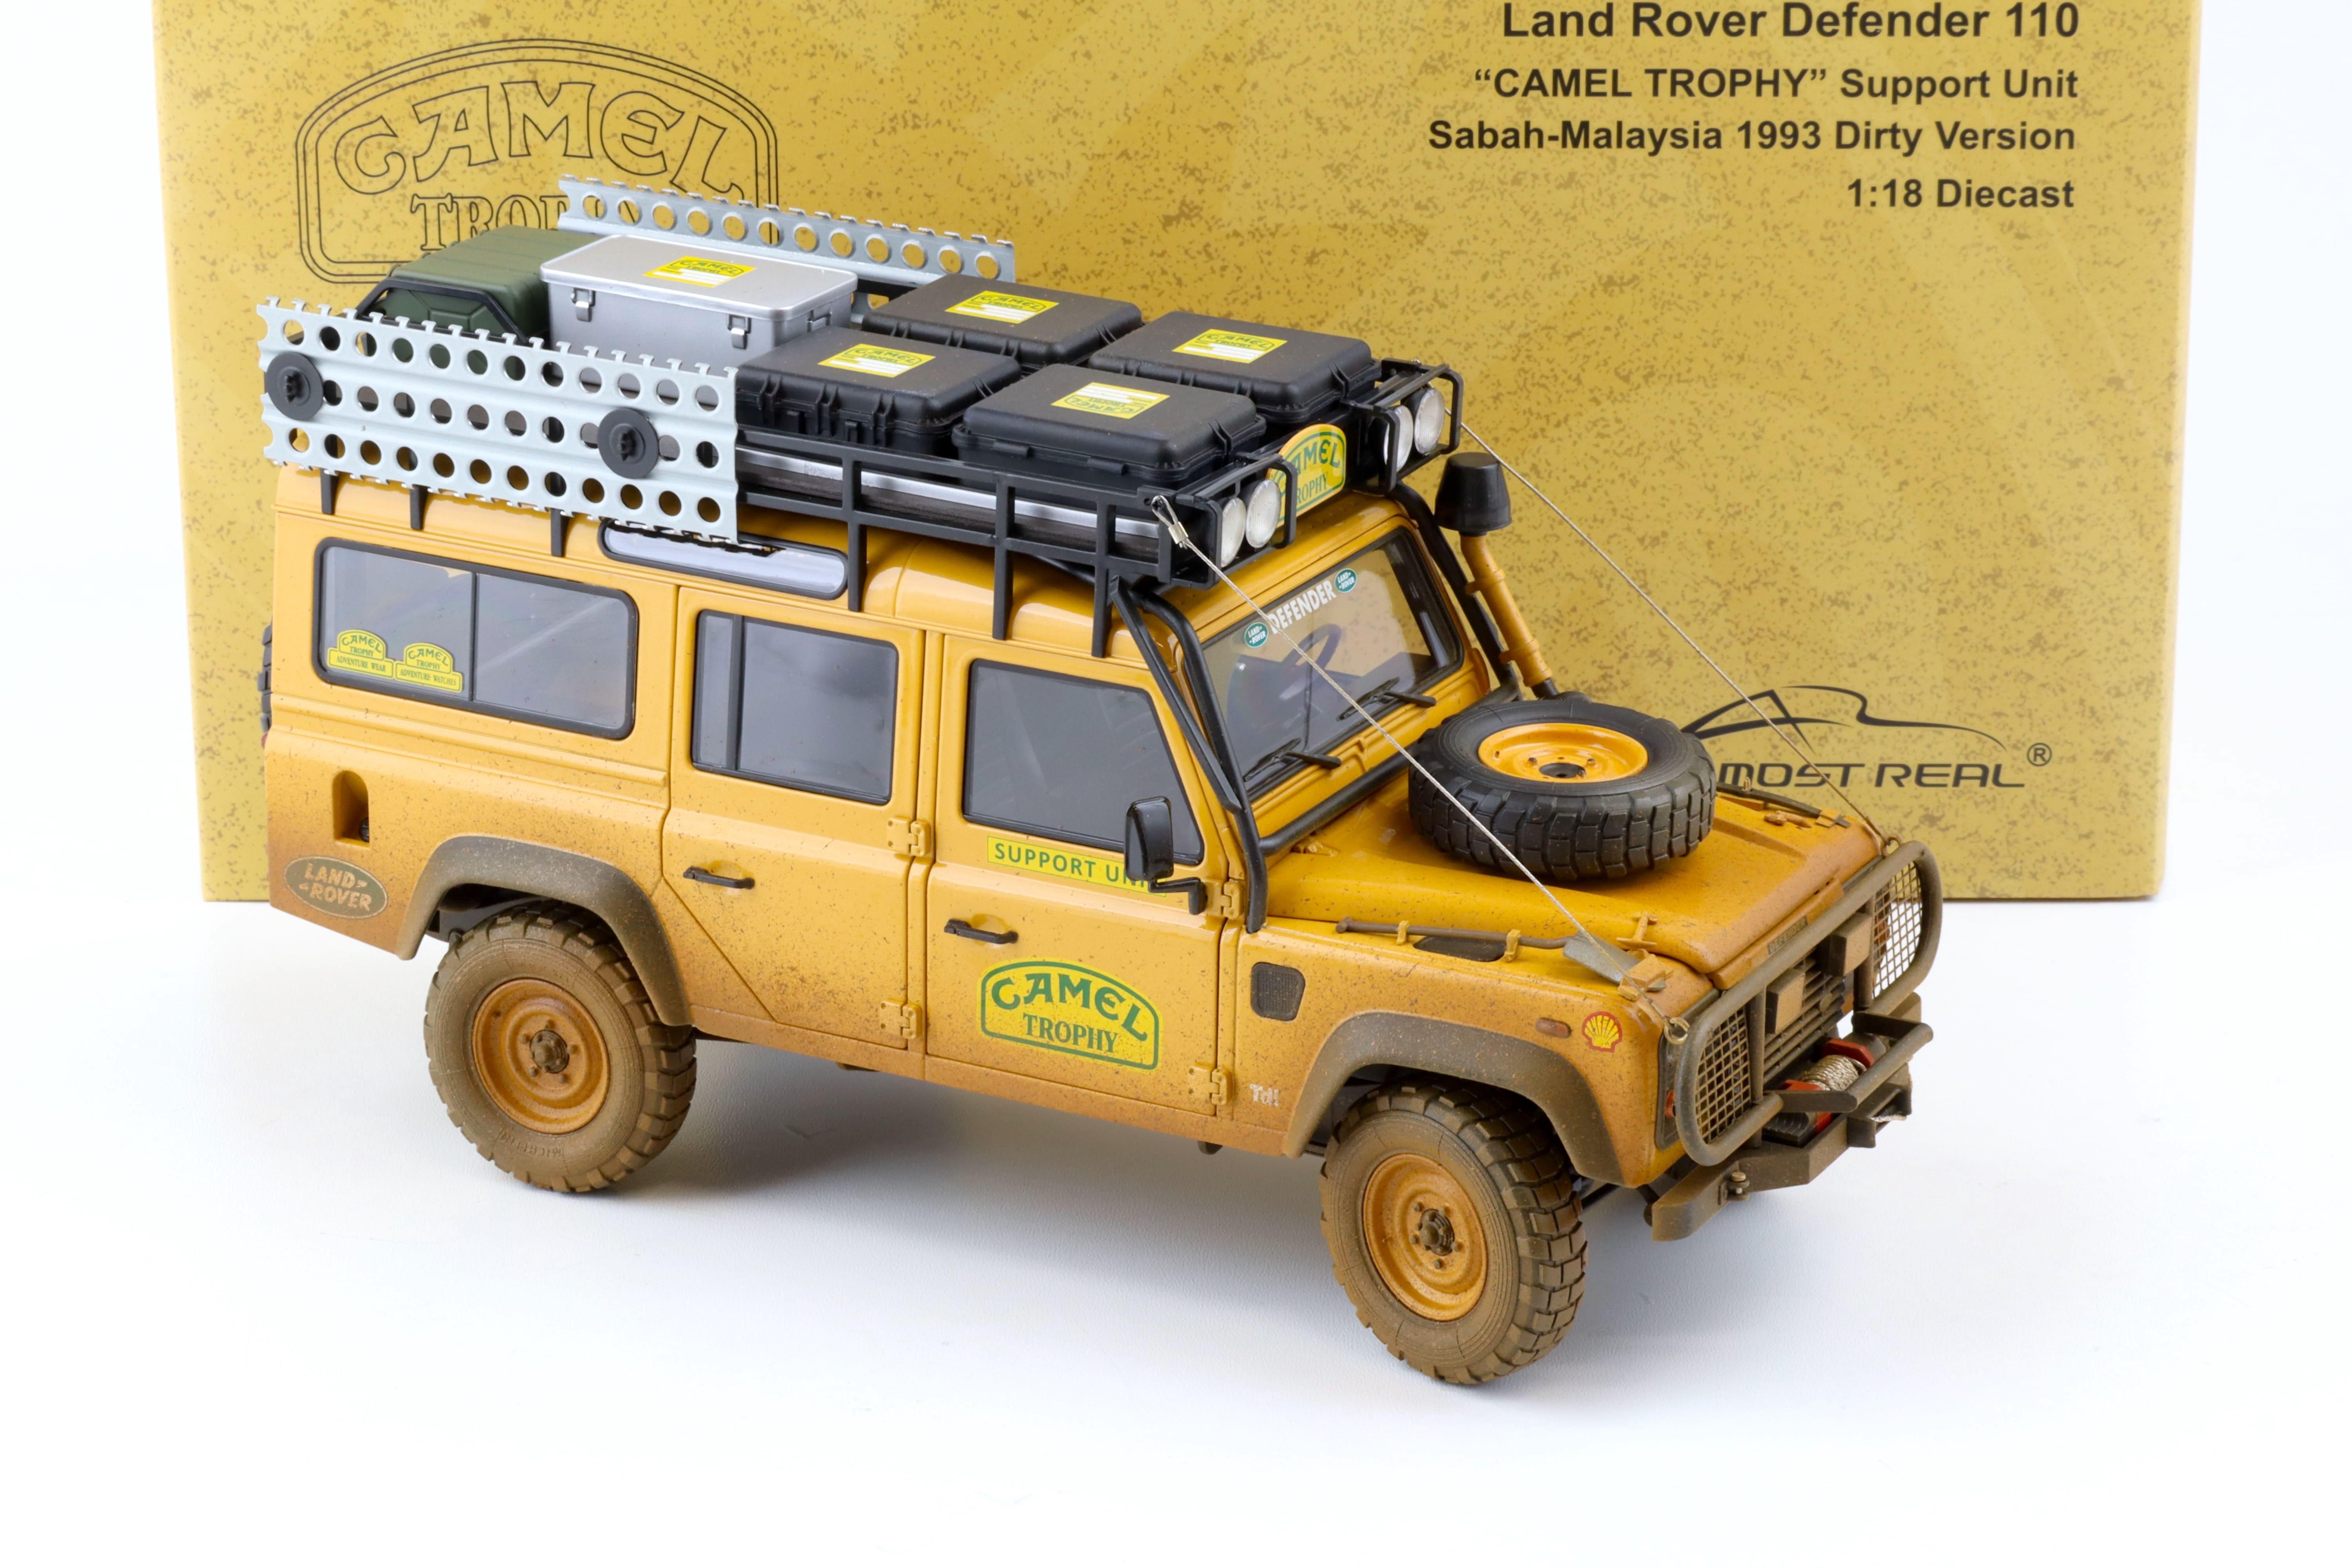 1:18 Almost Real Land Rover Defender 110 Camel Trophy Support Unit 1993 Dirty Version